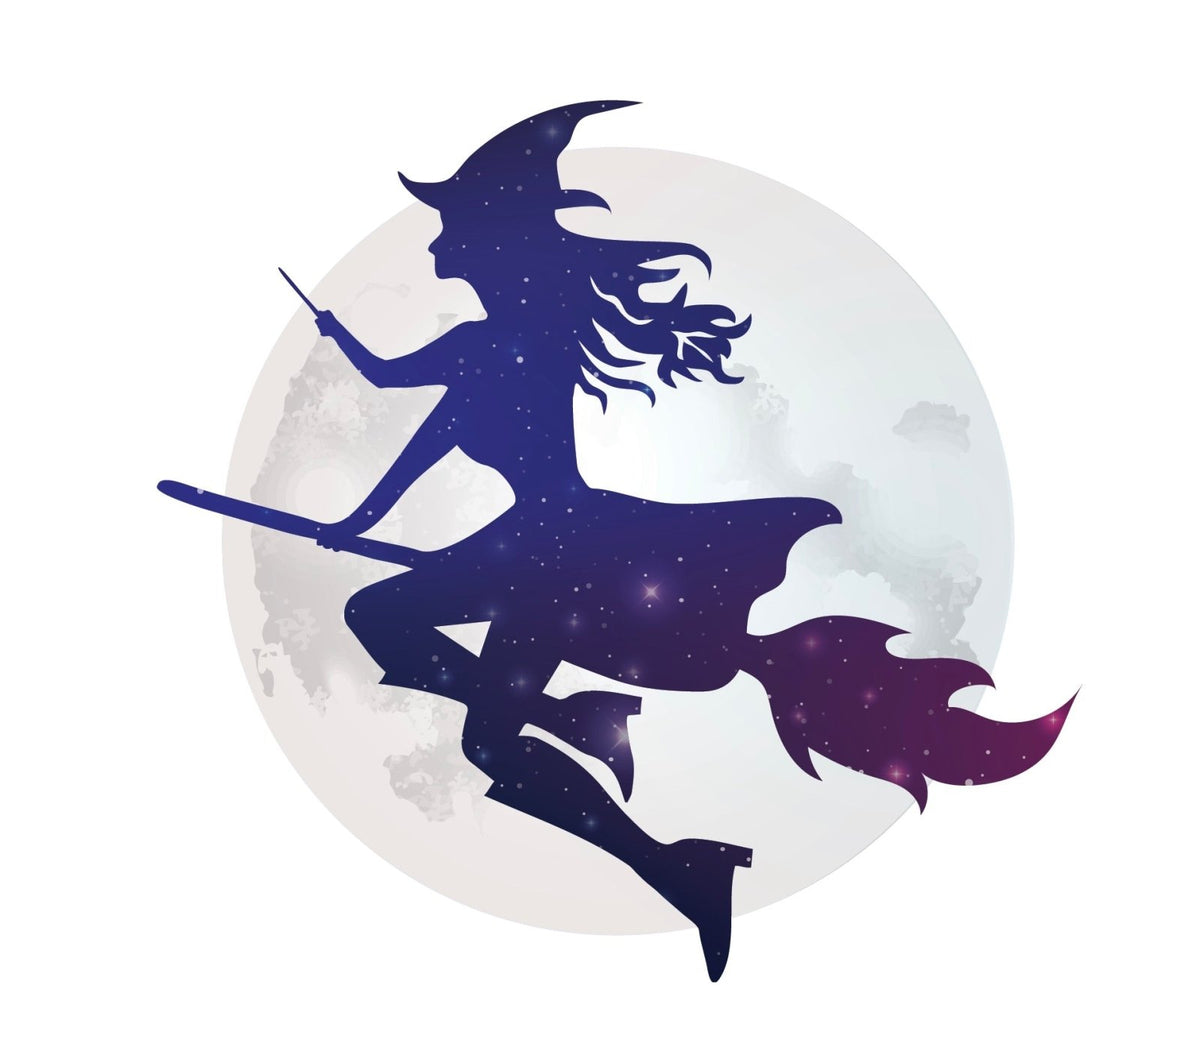 Silhouette of a Young Witch on Broomstick flying against a full moon with a starry, cloud-speckled background by Cover-Alls.